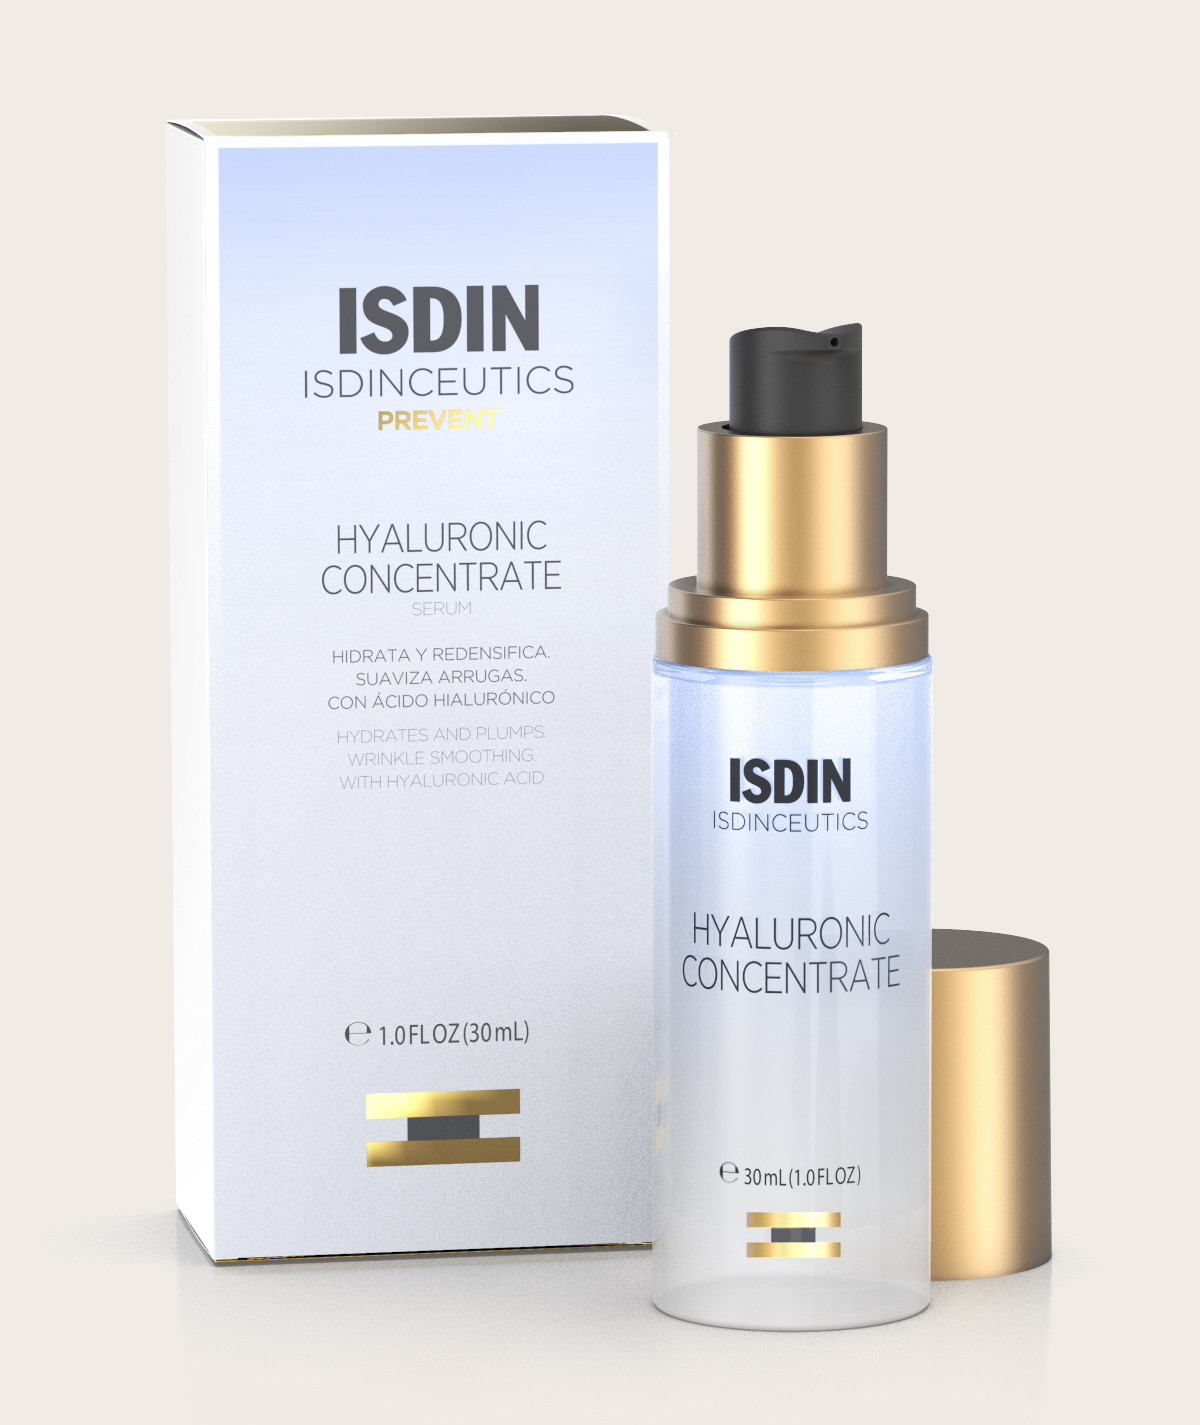 ISDINCEUTICS HYALURONIC CONCENTRATE 30ML + REGALO AGE REPAIR 25ML